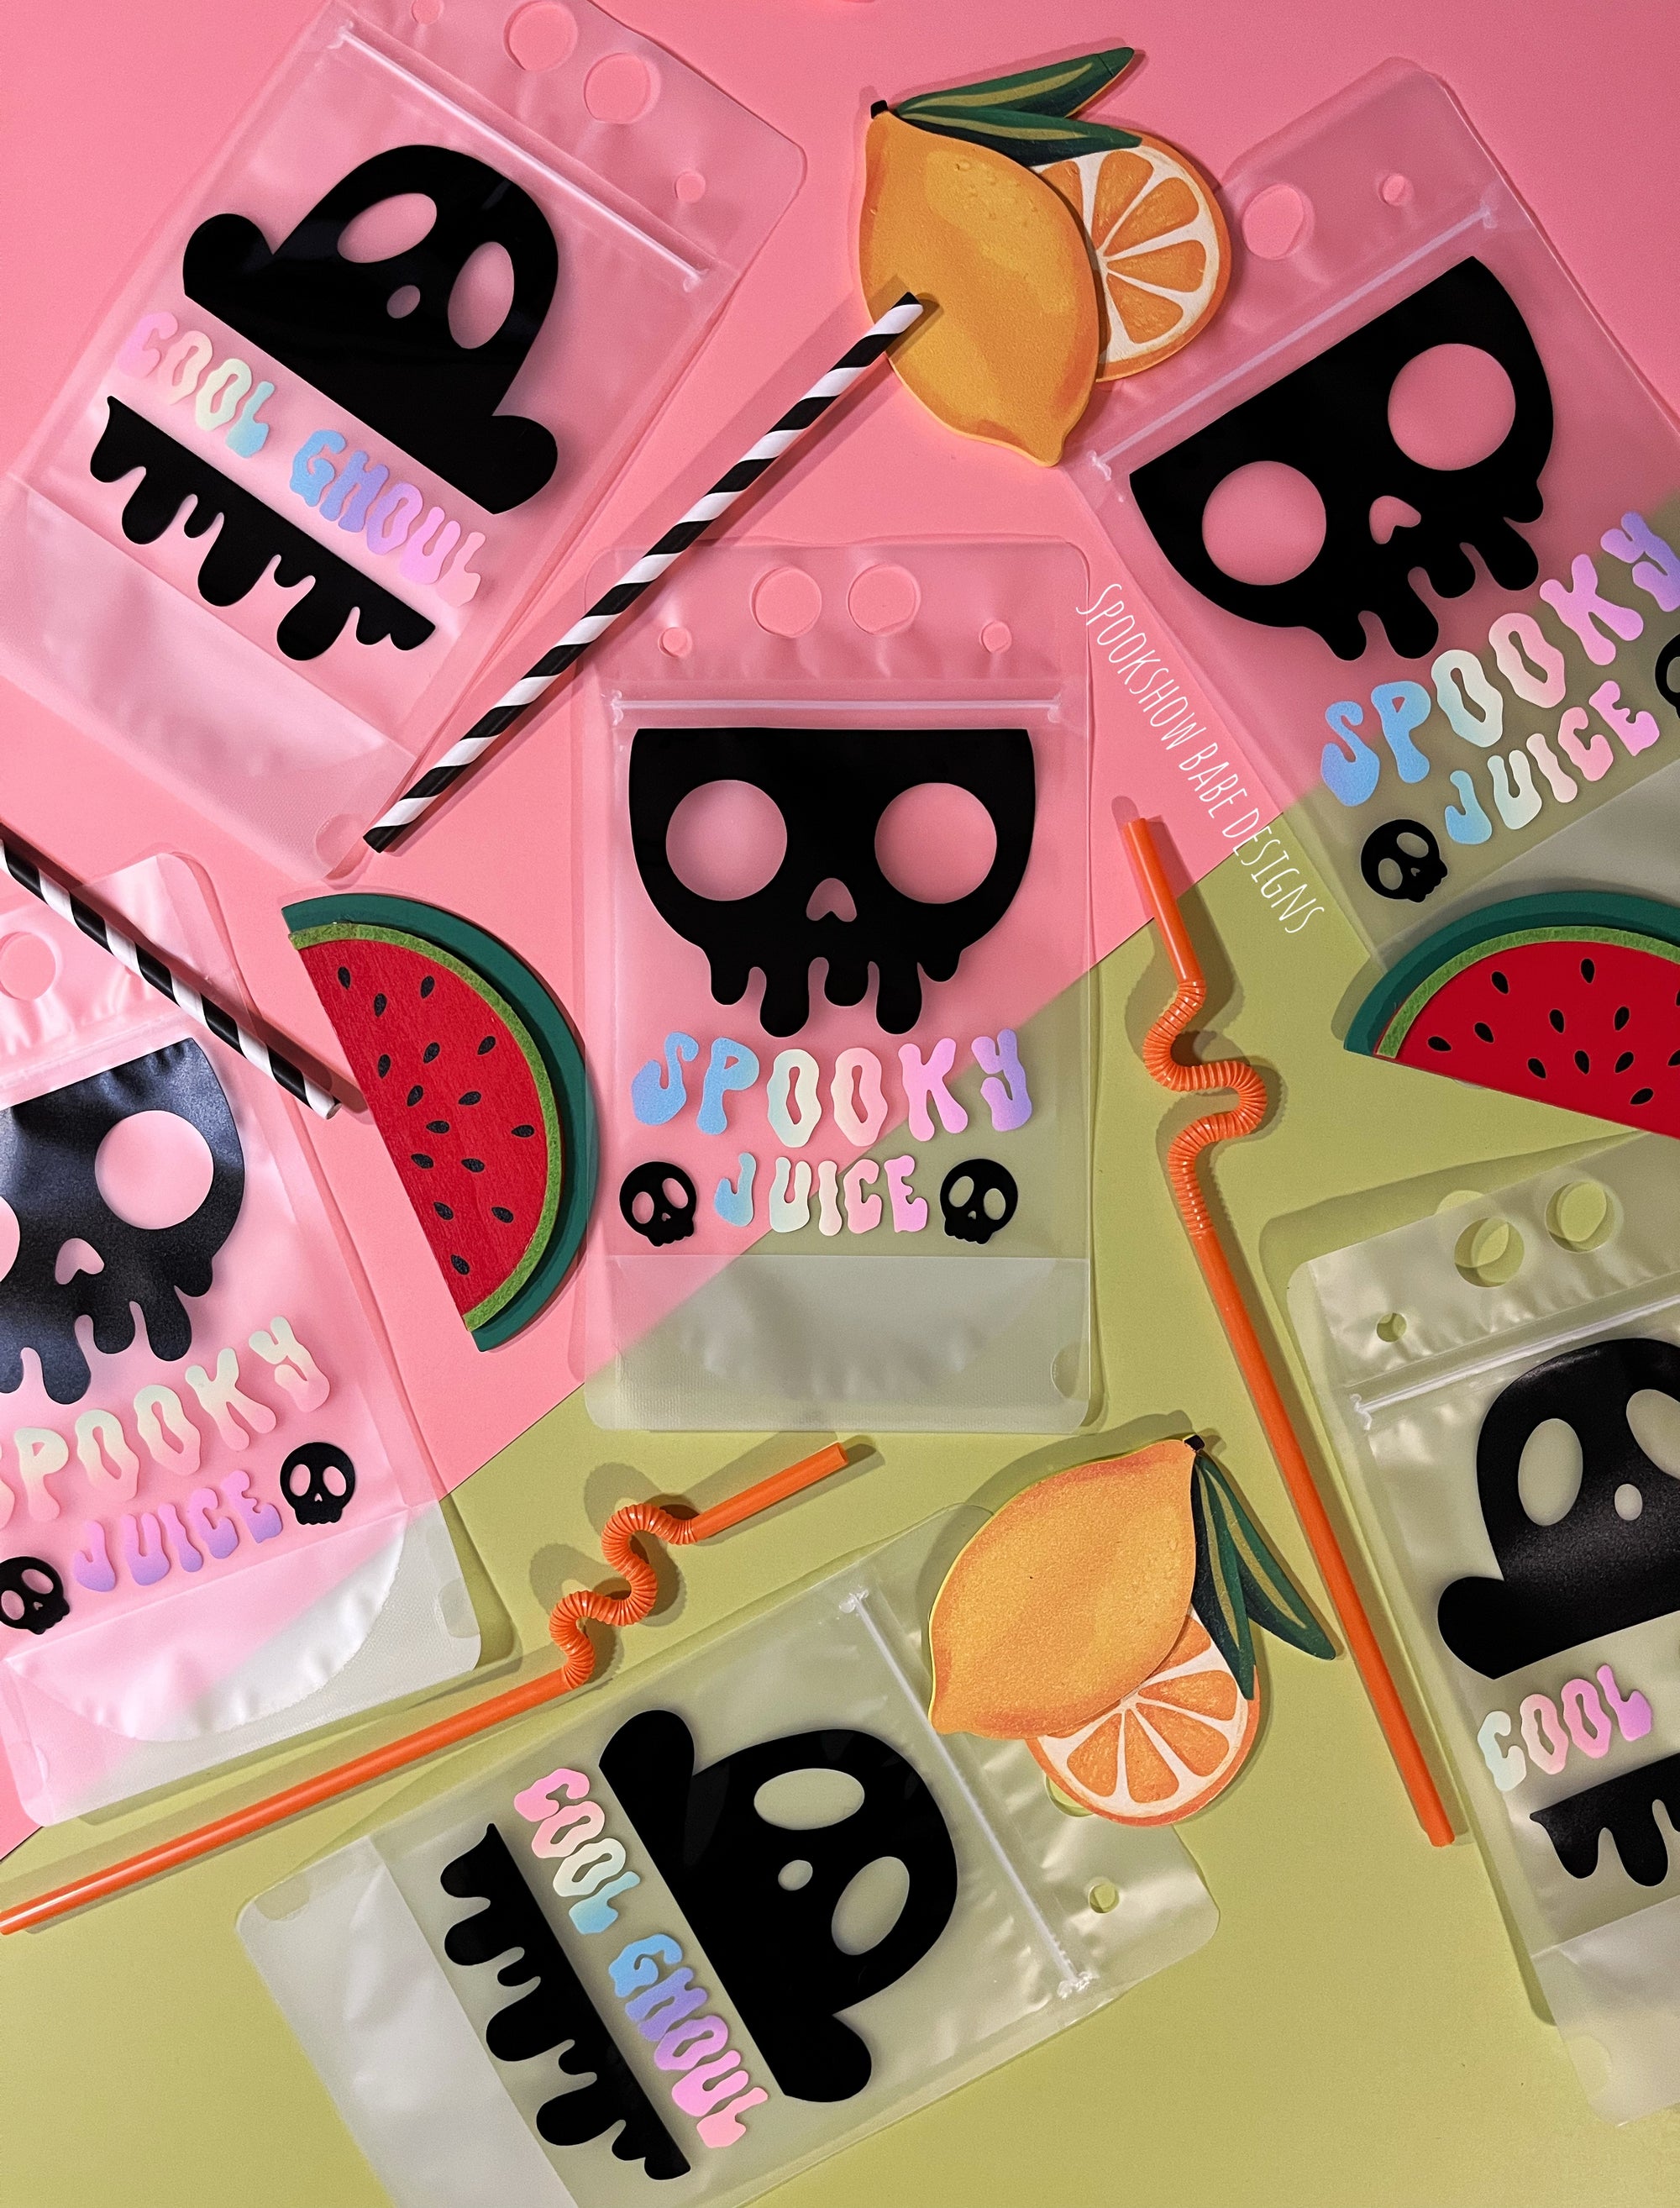 Summerween Spooky Drink Pouches